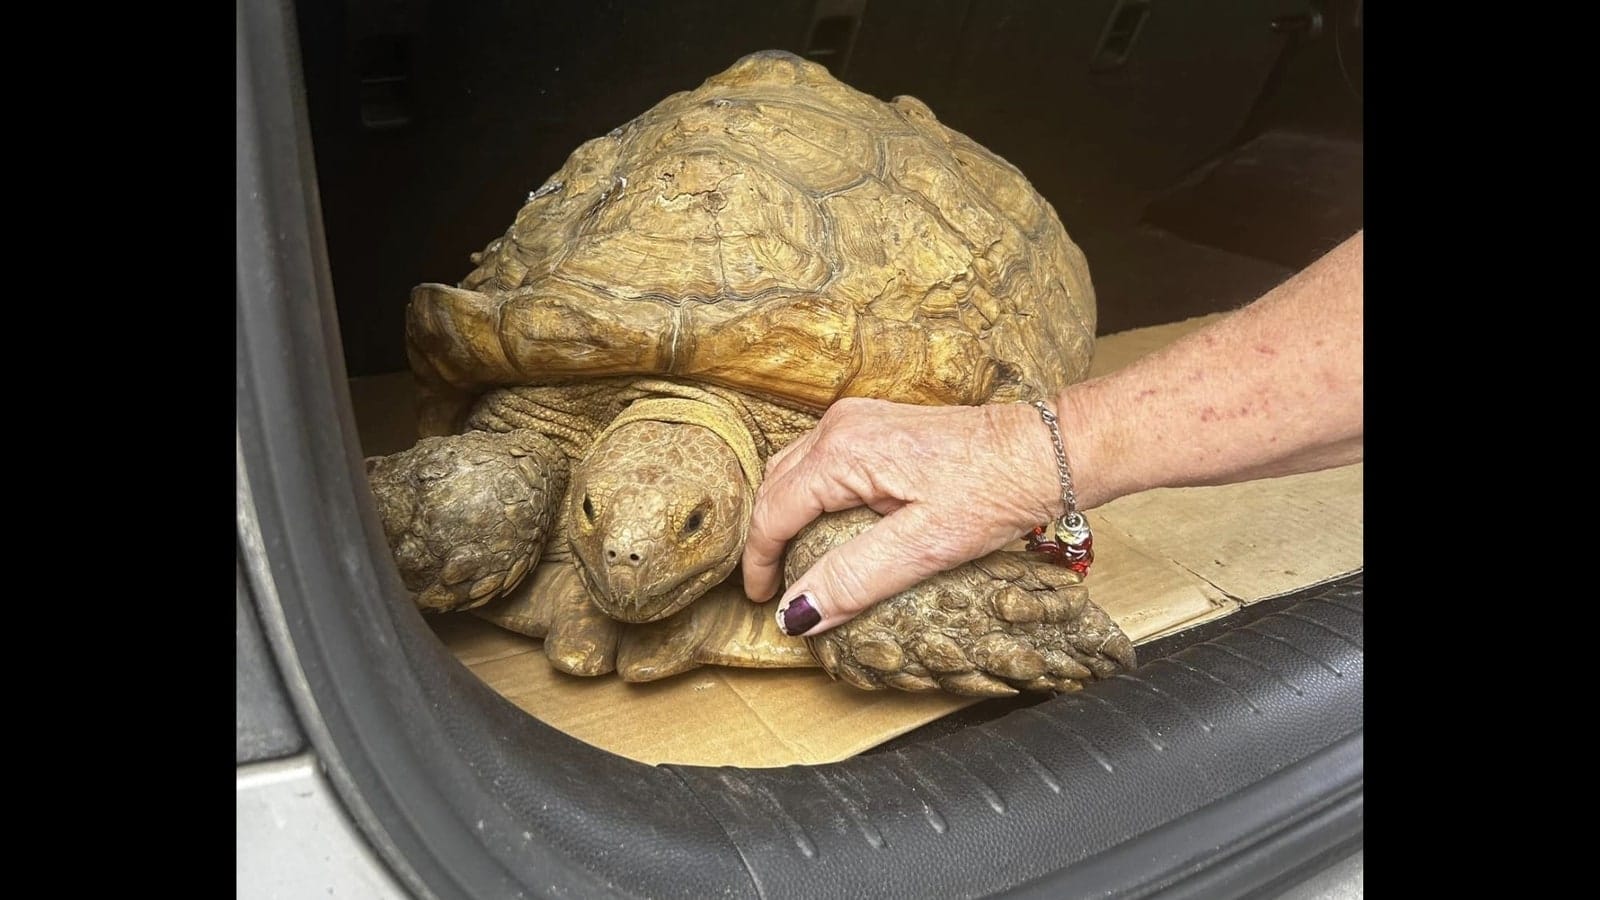 Lost tortoise returns home after over three years